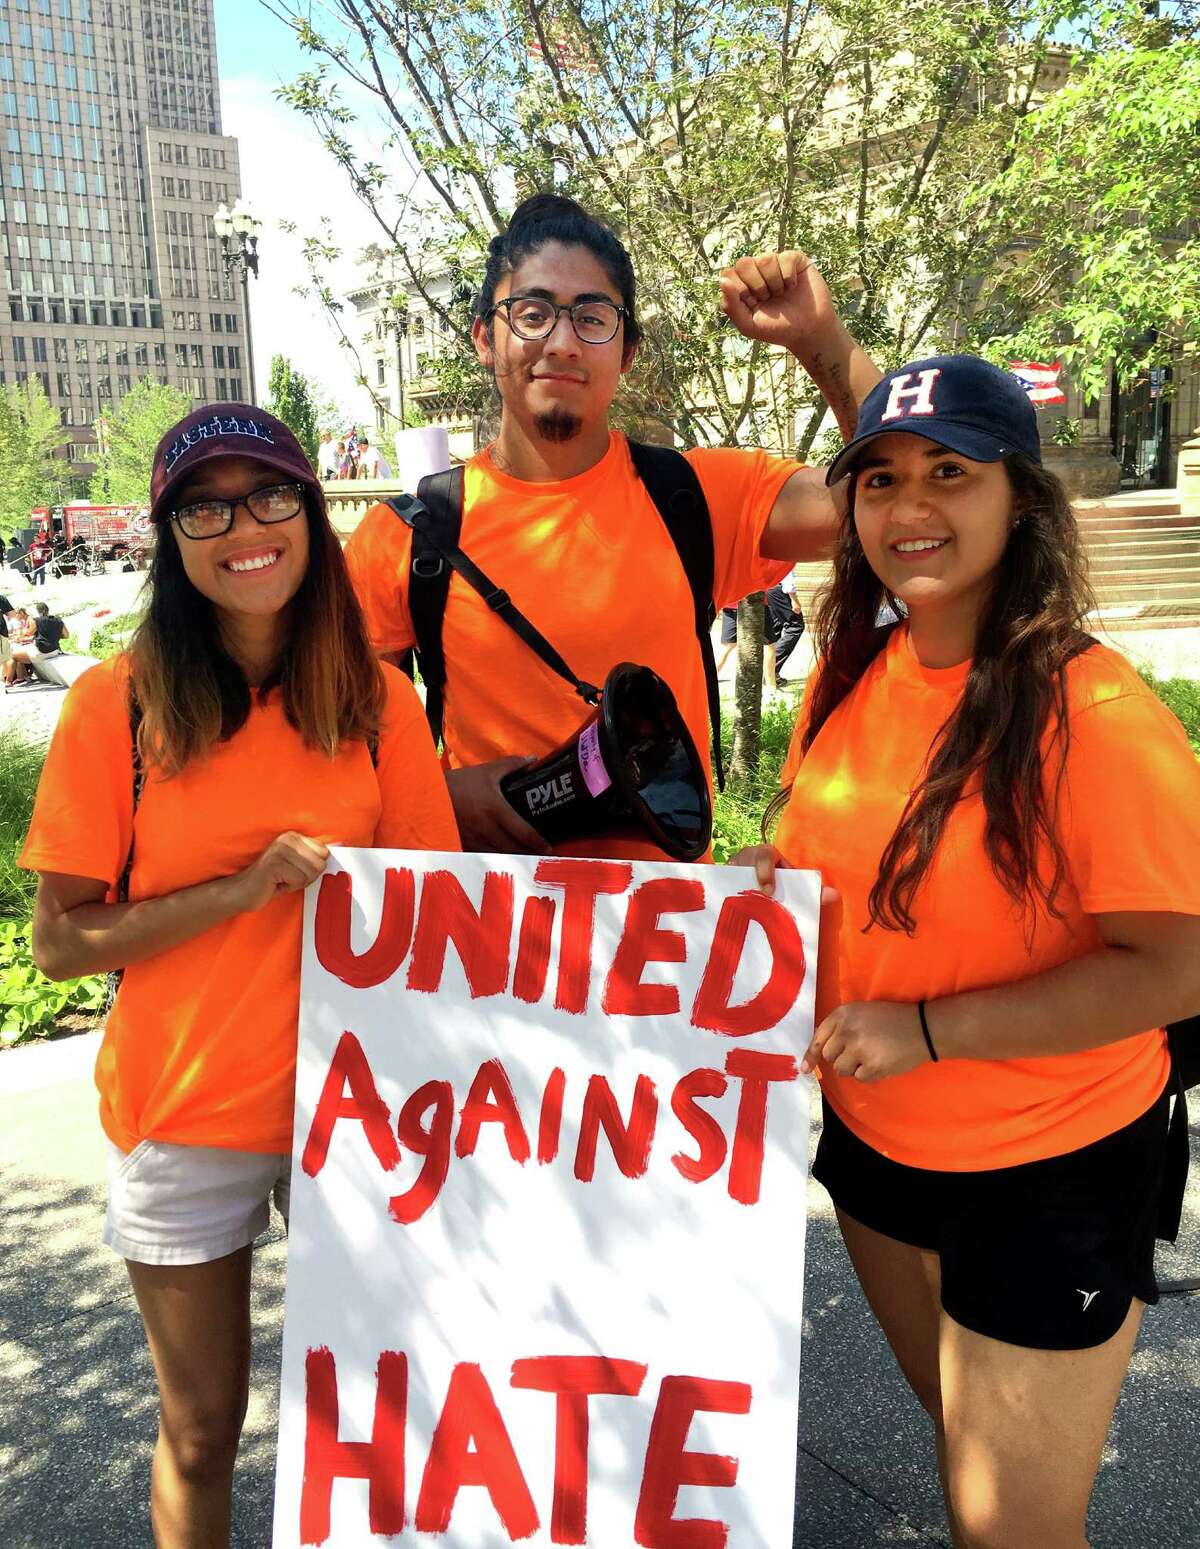 Yenimar Corres from New Haven, Eric Cruz Lopez from Bridgeport and Laura Veira from Norwalk are three Connecticut students and members of CT for a Dream that protested at the RNC convention in Cleveland, Ohio on Monday. July 18, 2016.